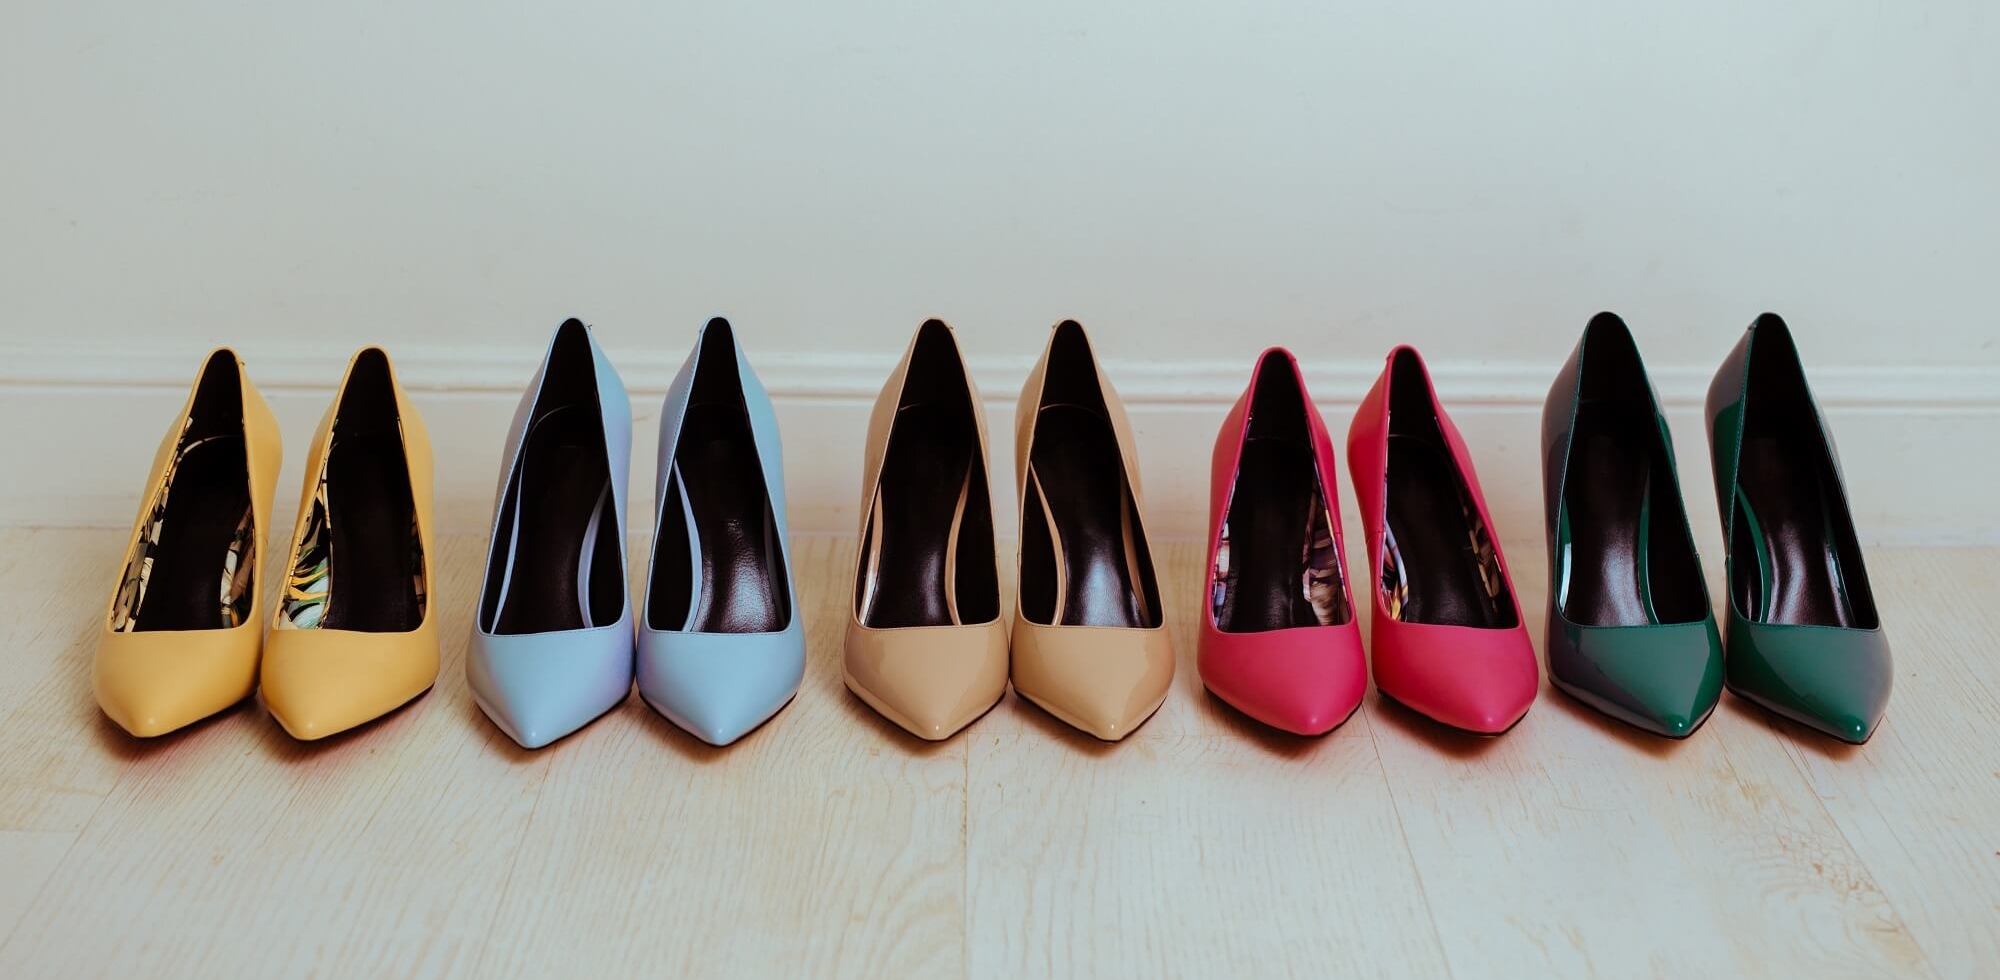 Duplicate pairs of shoes